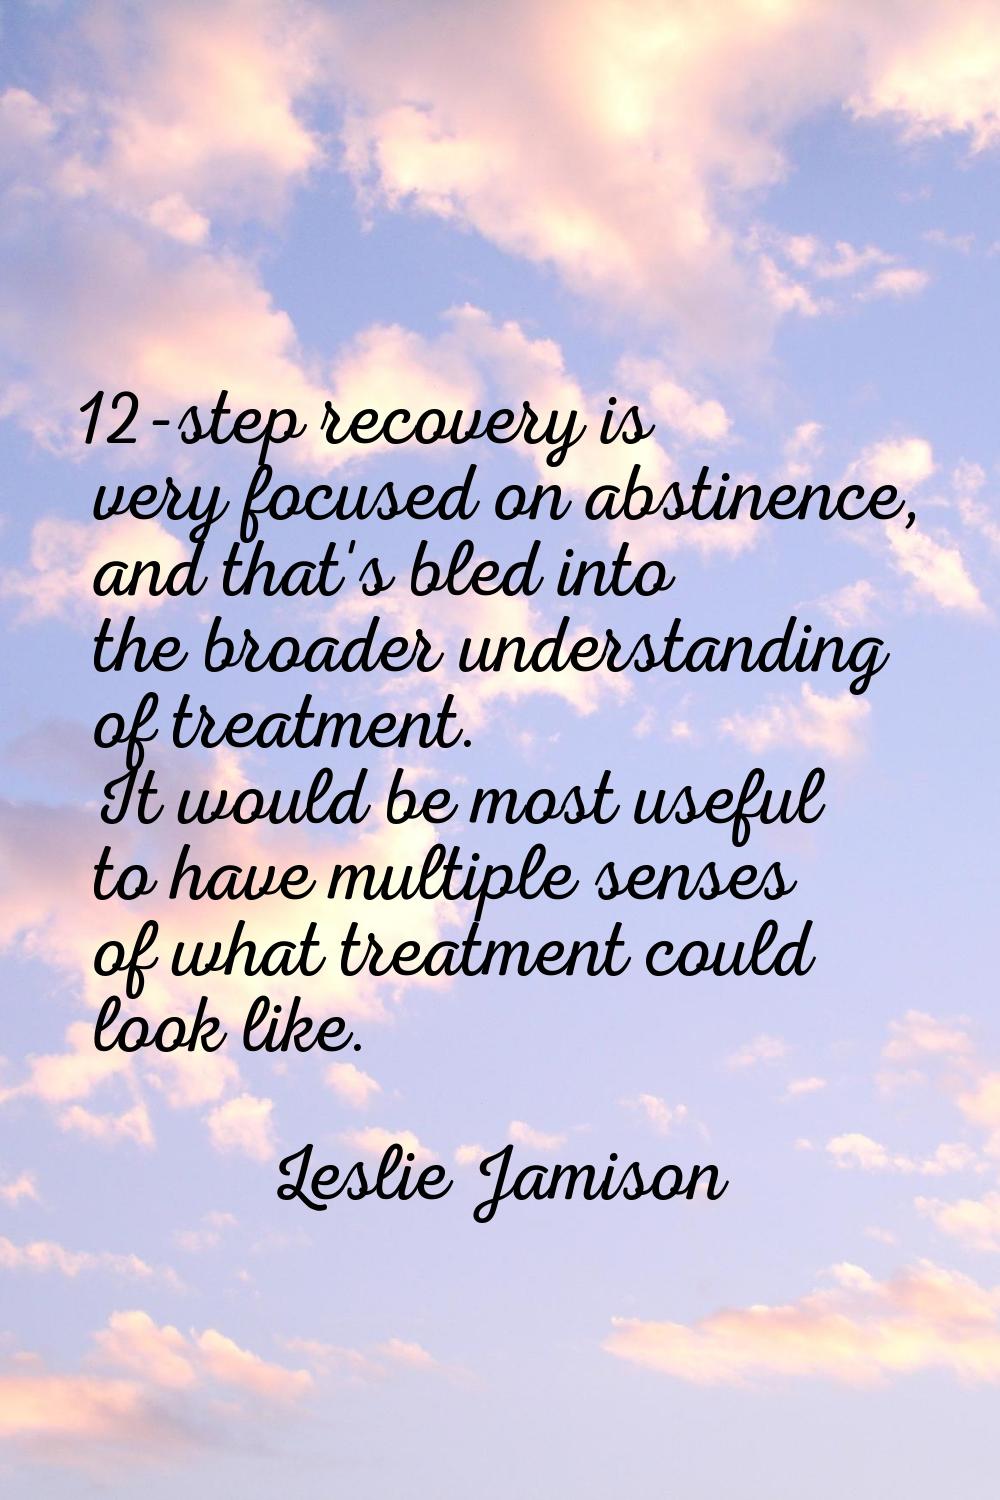 12-step recovery is very focused on abstinence, and that's bled into the broader understanding of t